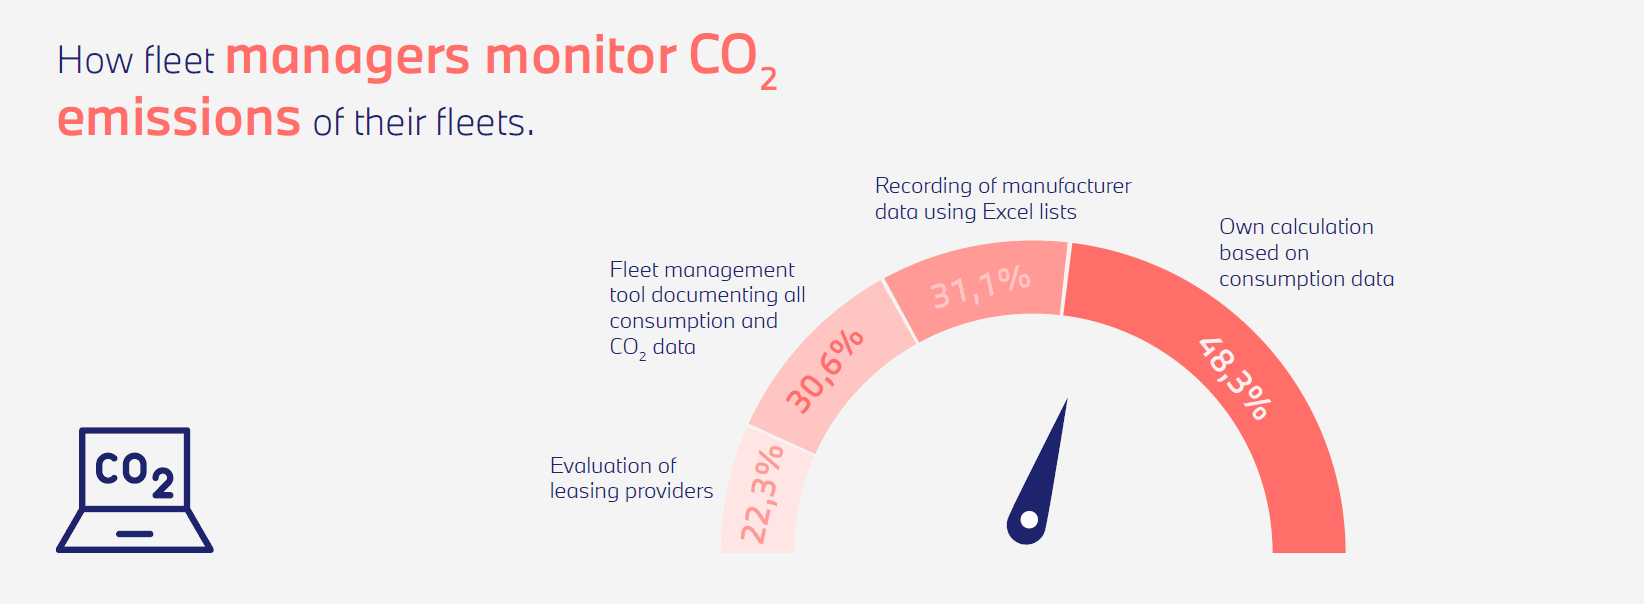 Only one of three corporate fleets have an average CO2 emission value below 100 g/km